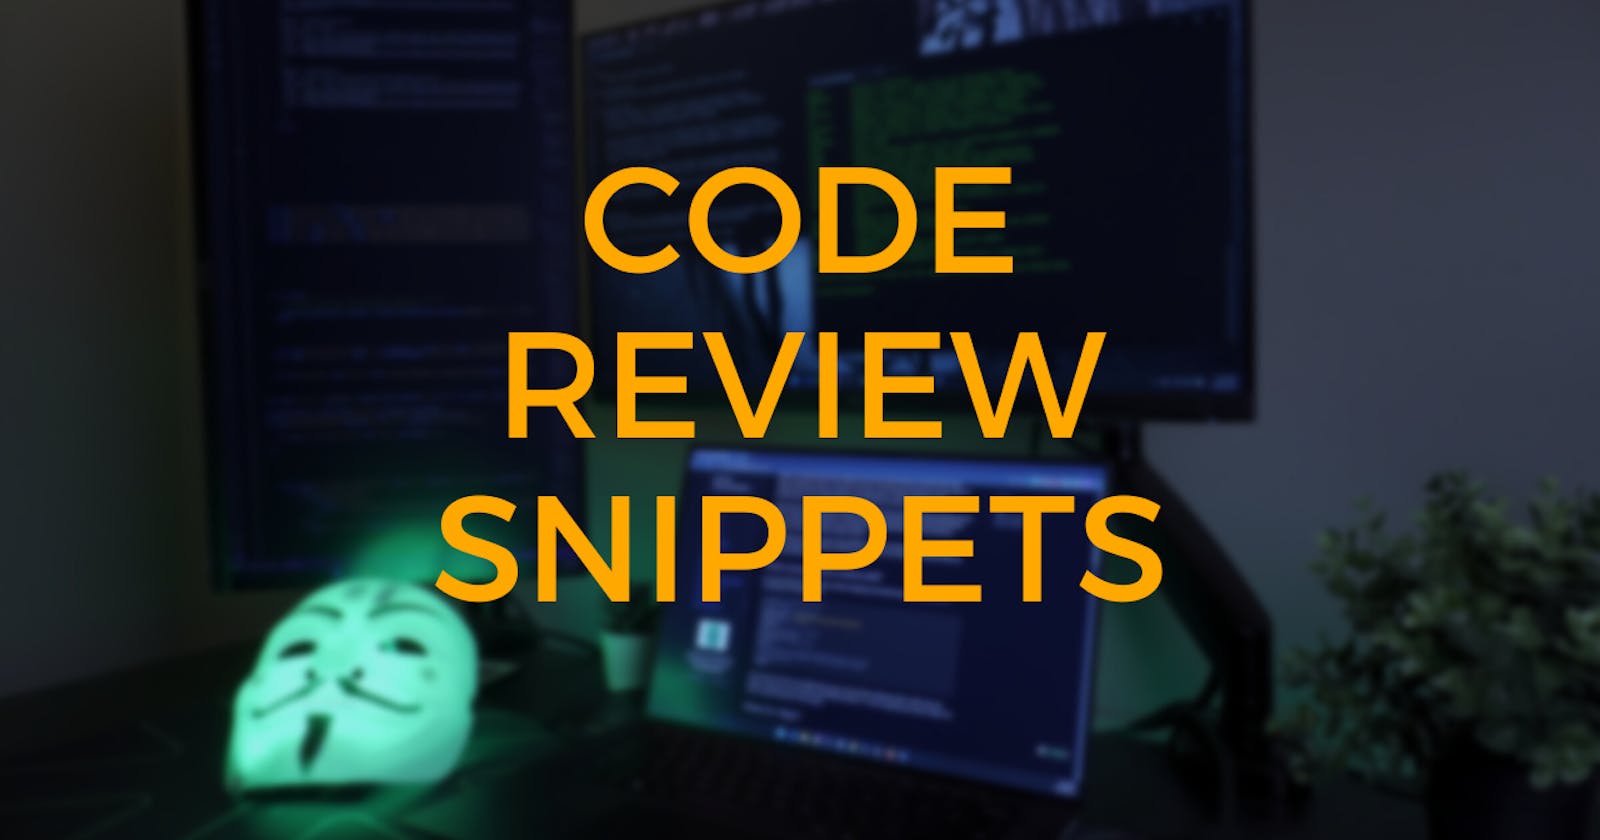 Code Review Snippets